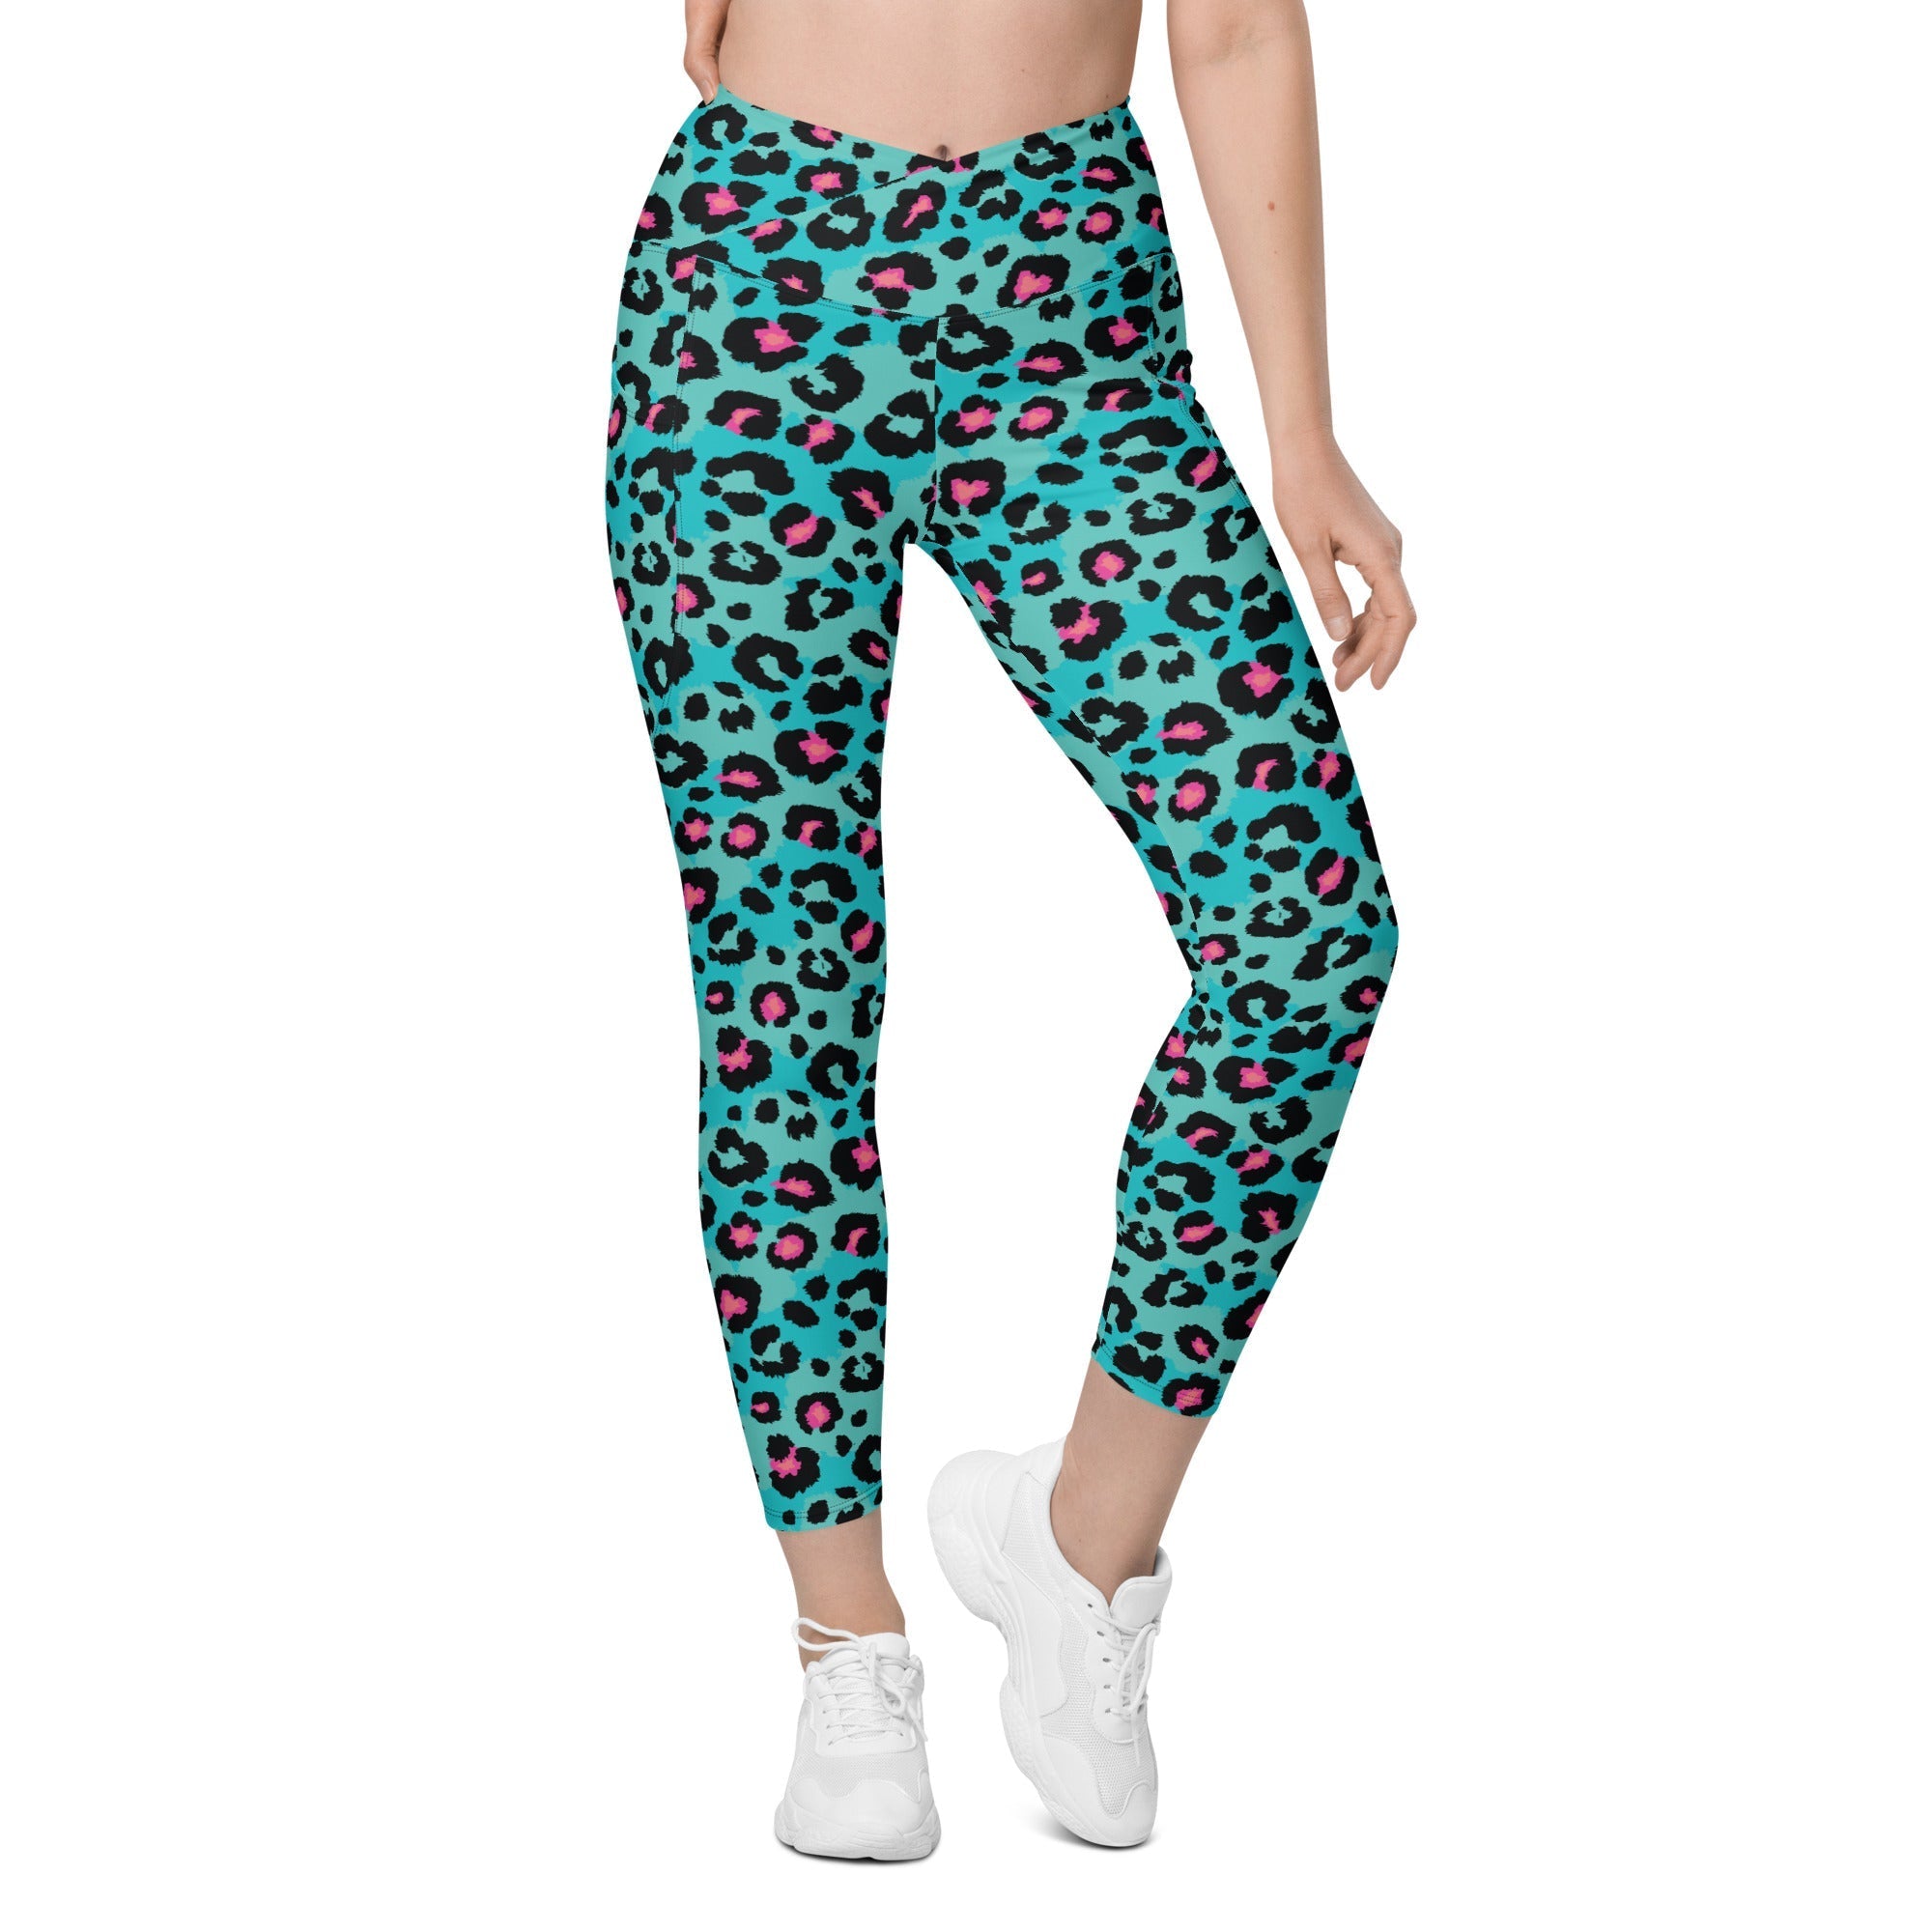 Turquoise Leopard Print Crossover Leggings With Pockets